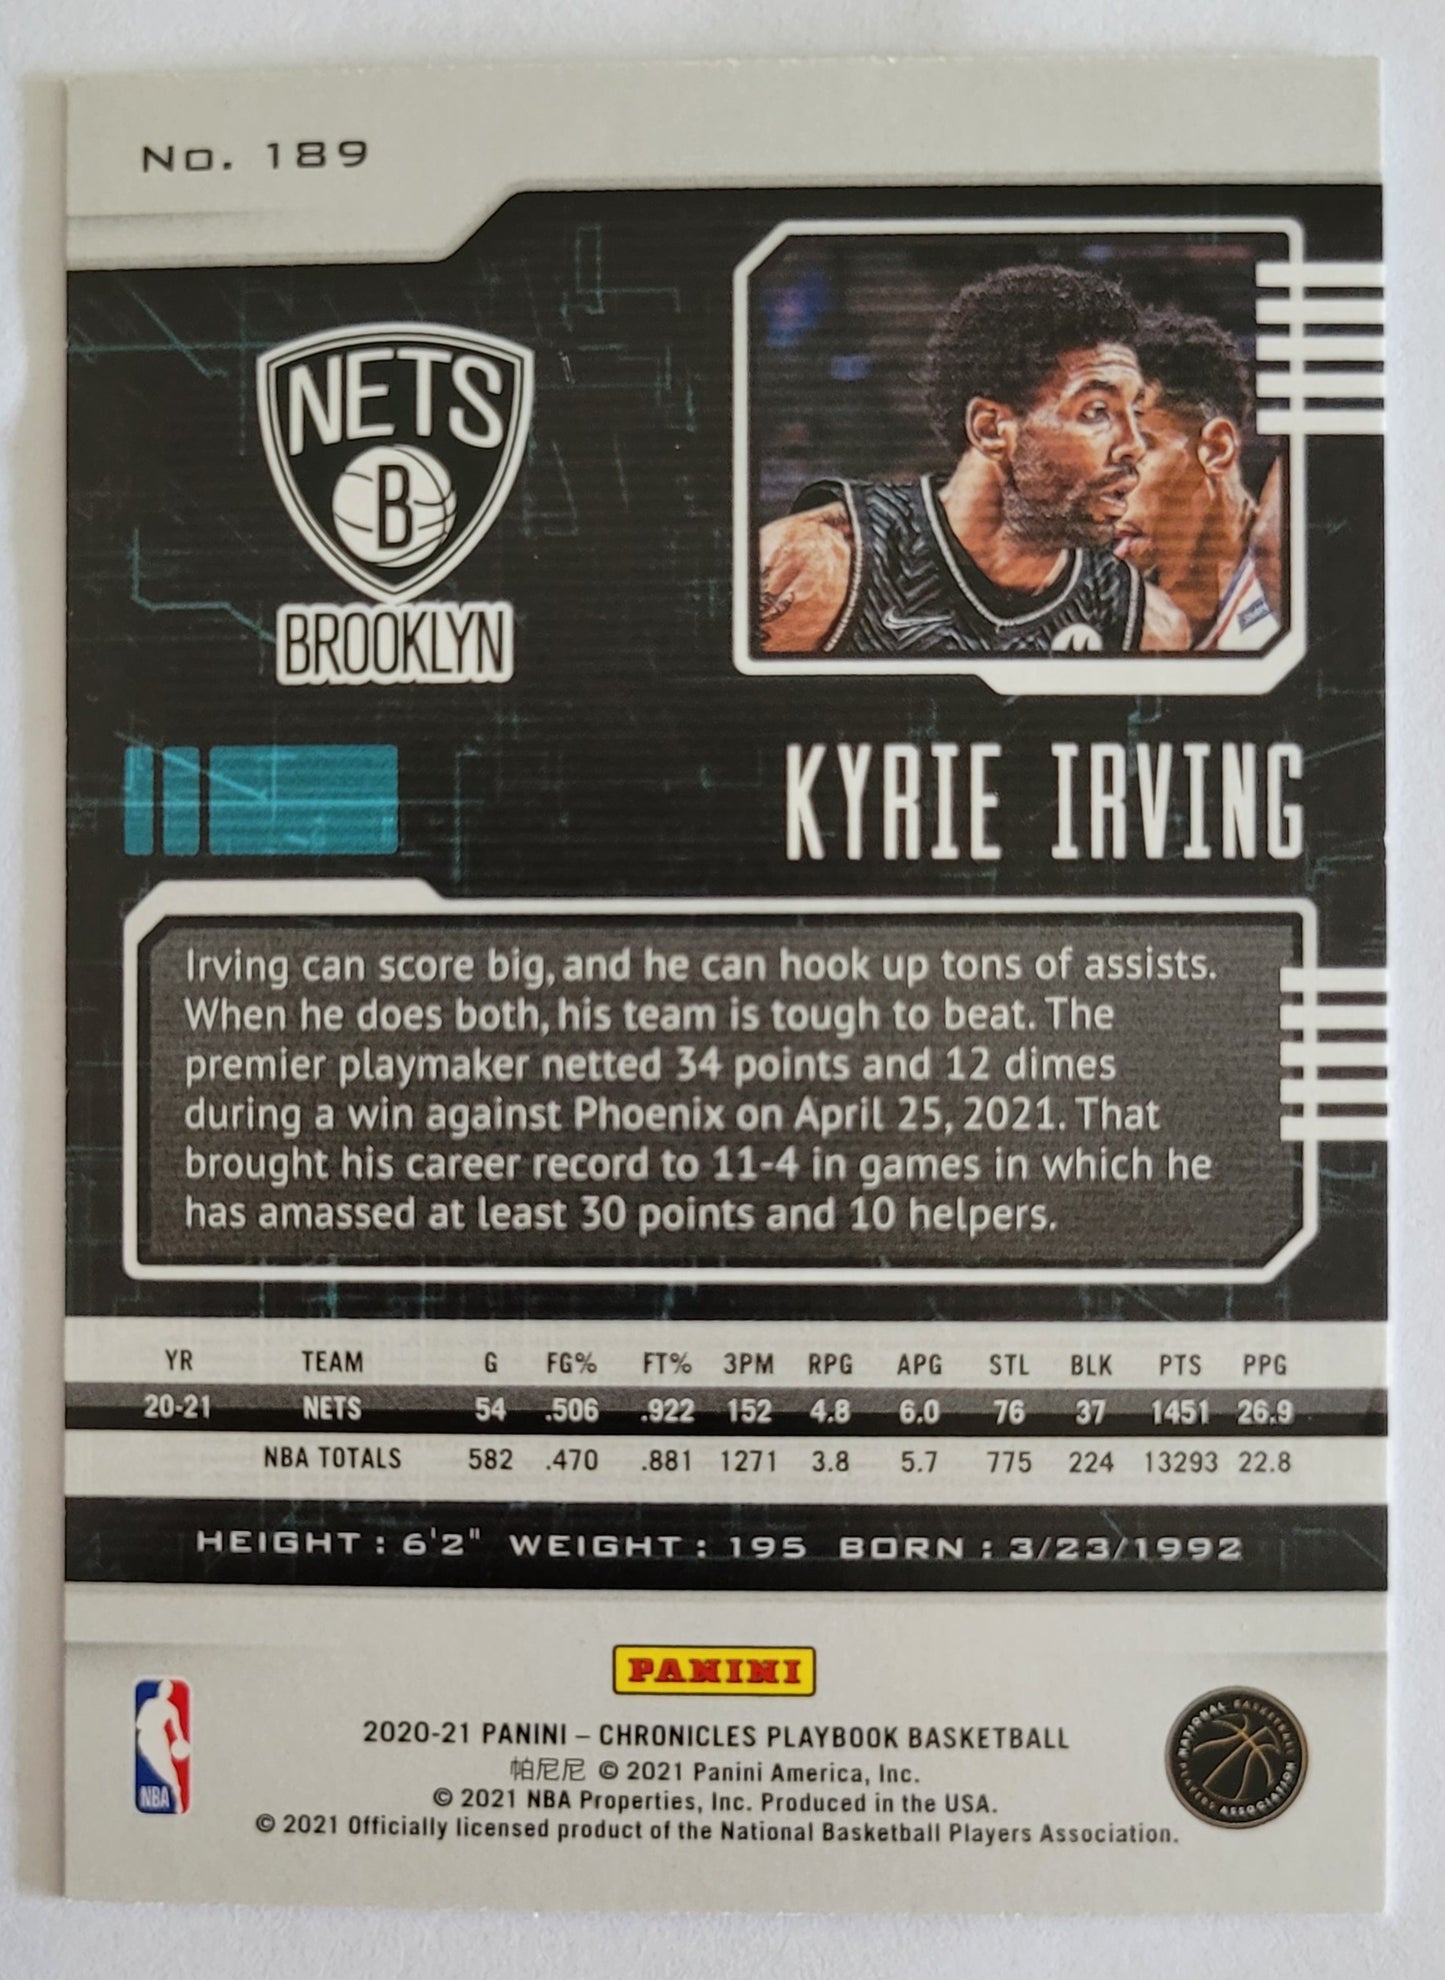 Kyrie Irving - 2020-21 Panini Chronicles Green #189 / Playbook